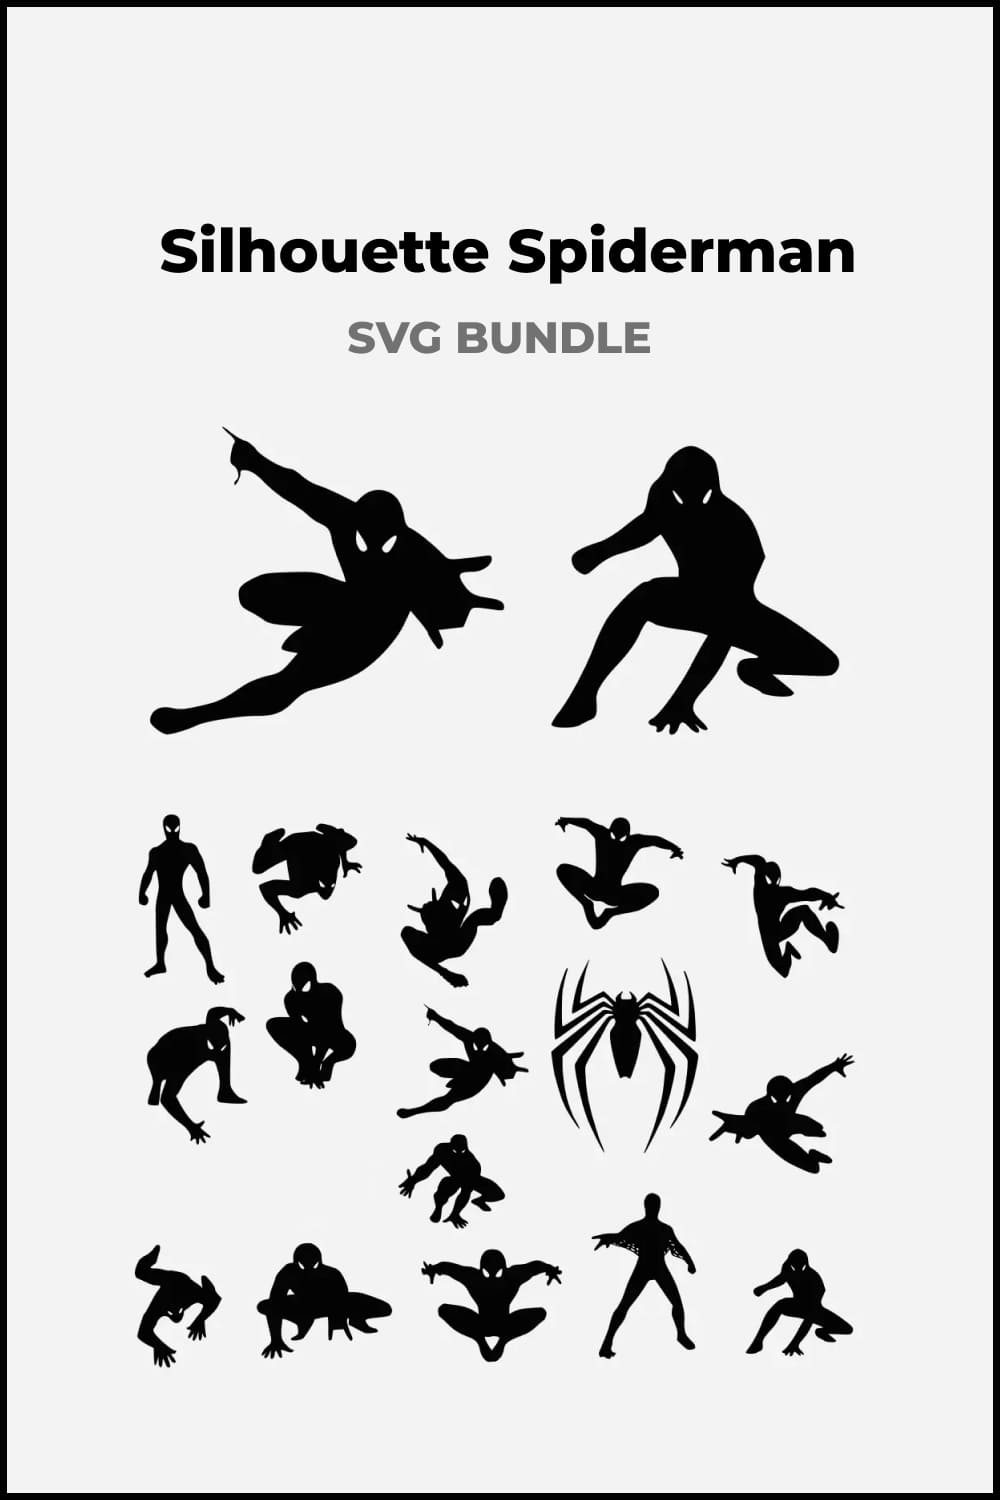 Collage from spiderman silhouettes in motion.